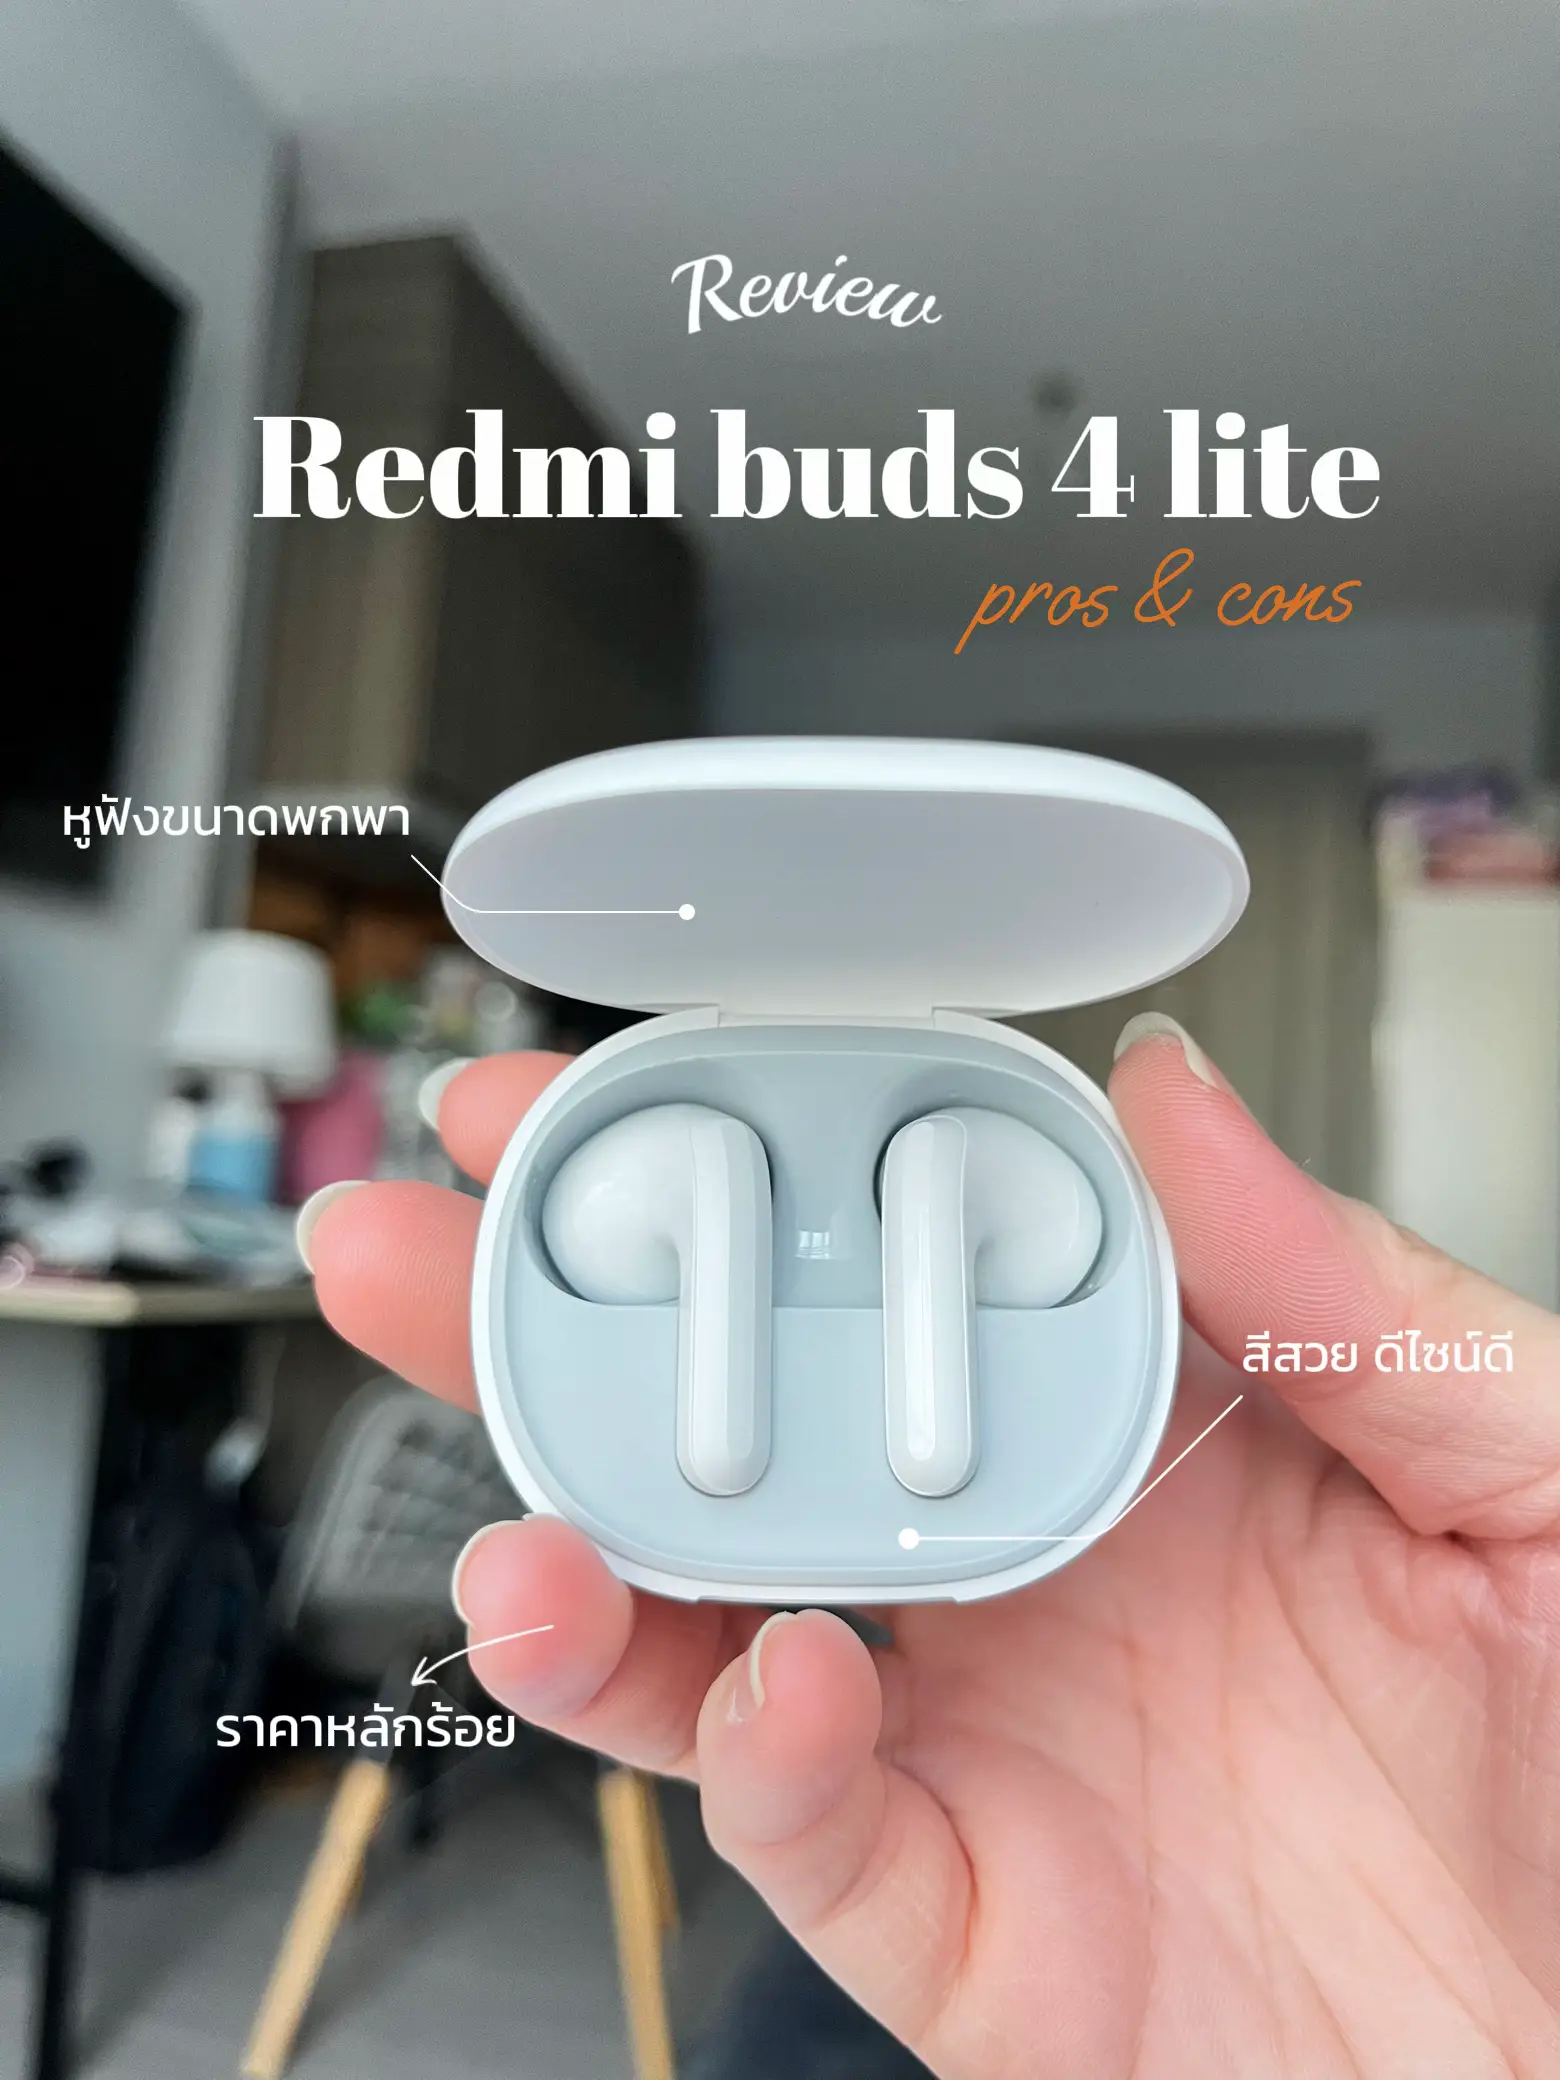 Budget earphones Redmi Buds 4 Lite: Are they any good? : r/Earbuds